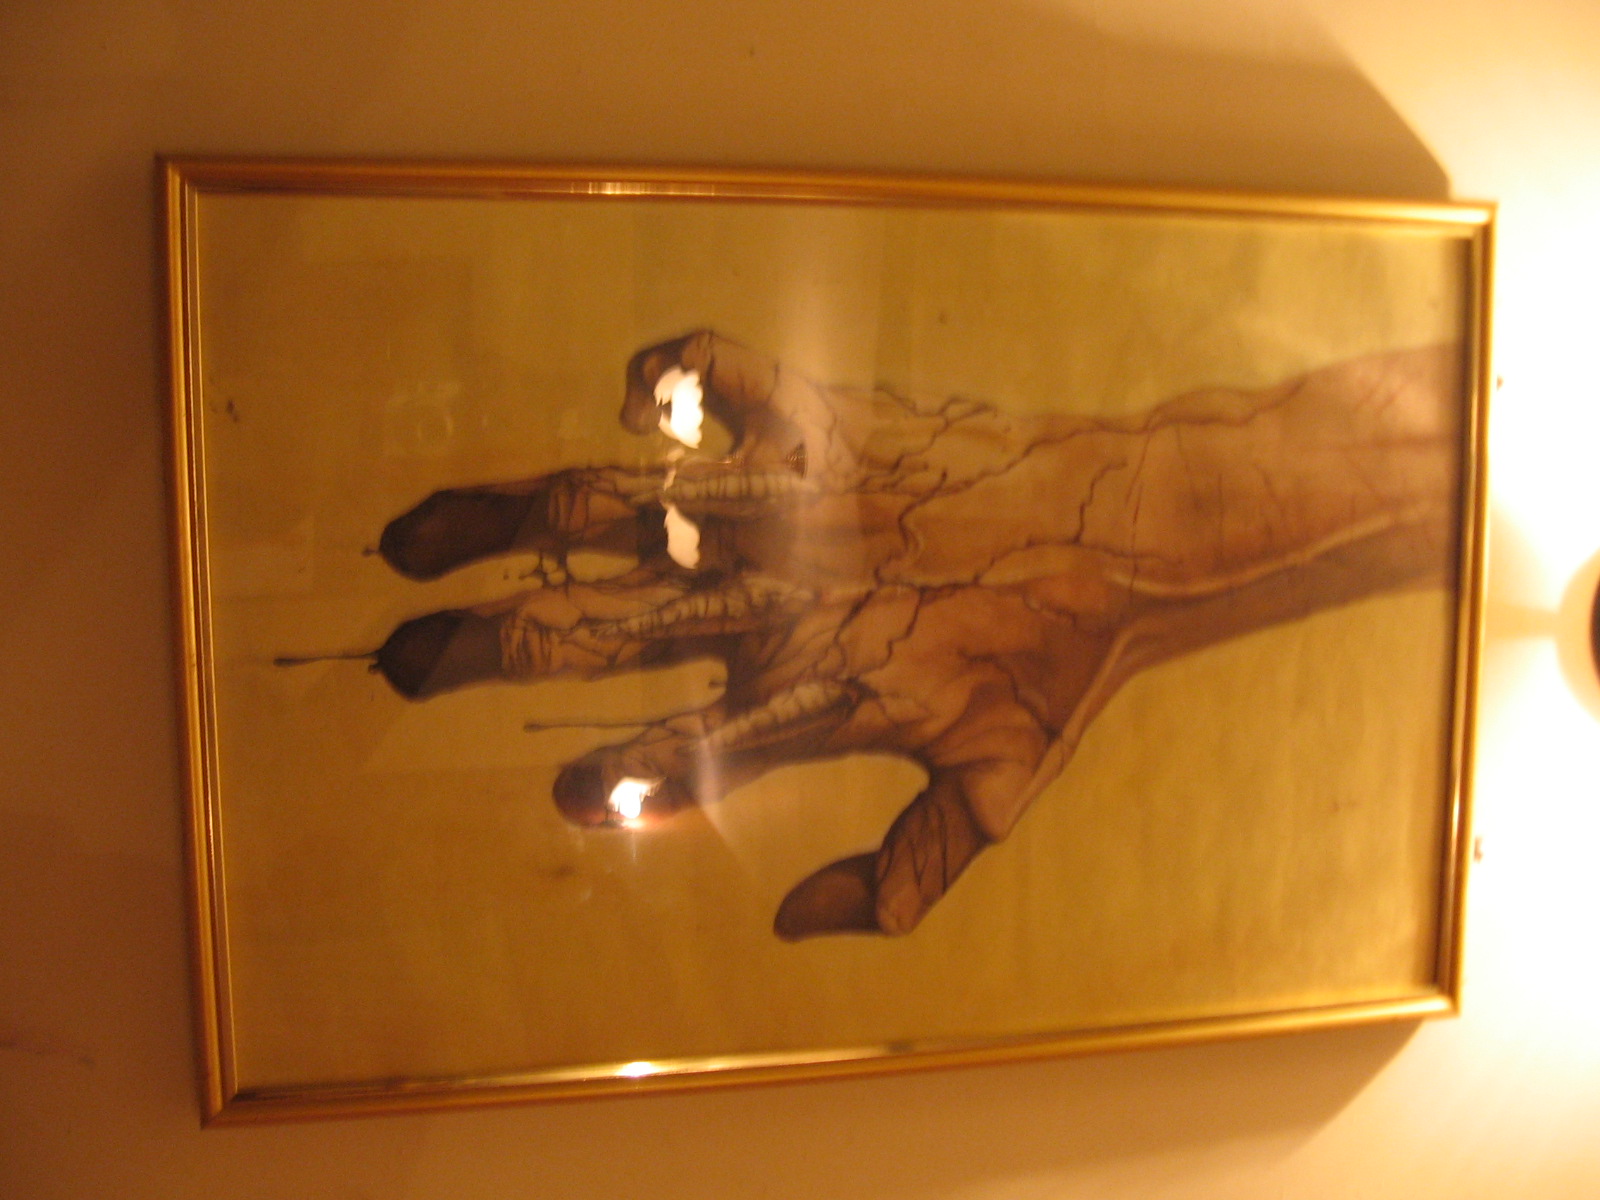 a picture of a hand painted on a wall in a room